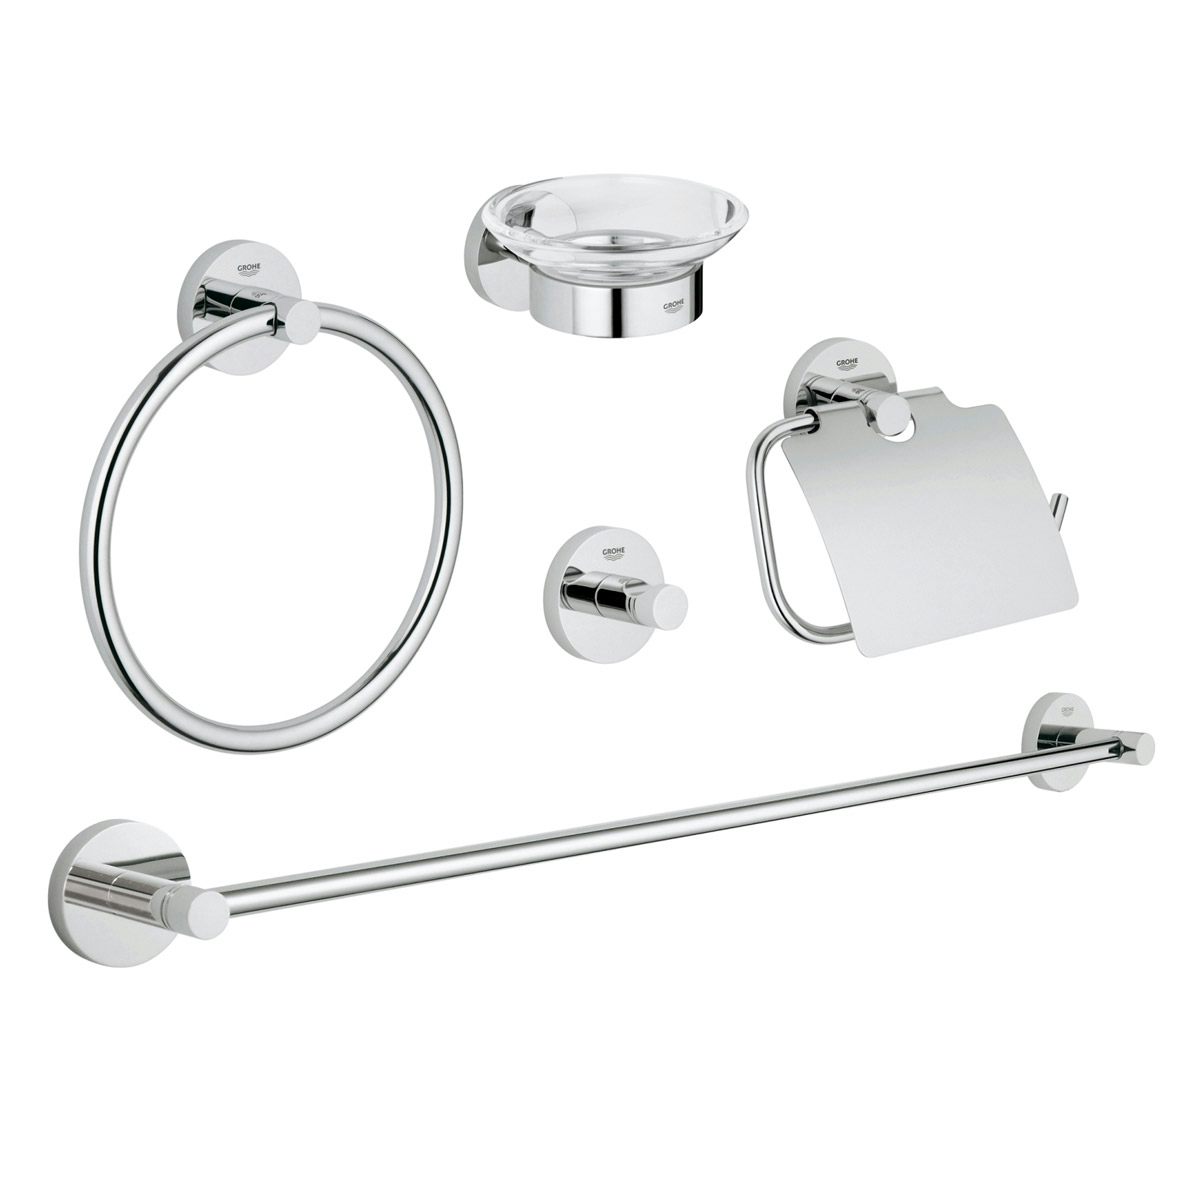 Grohe Essentials 5 in 1 master bathroom accessory set